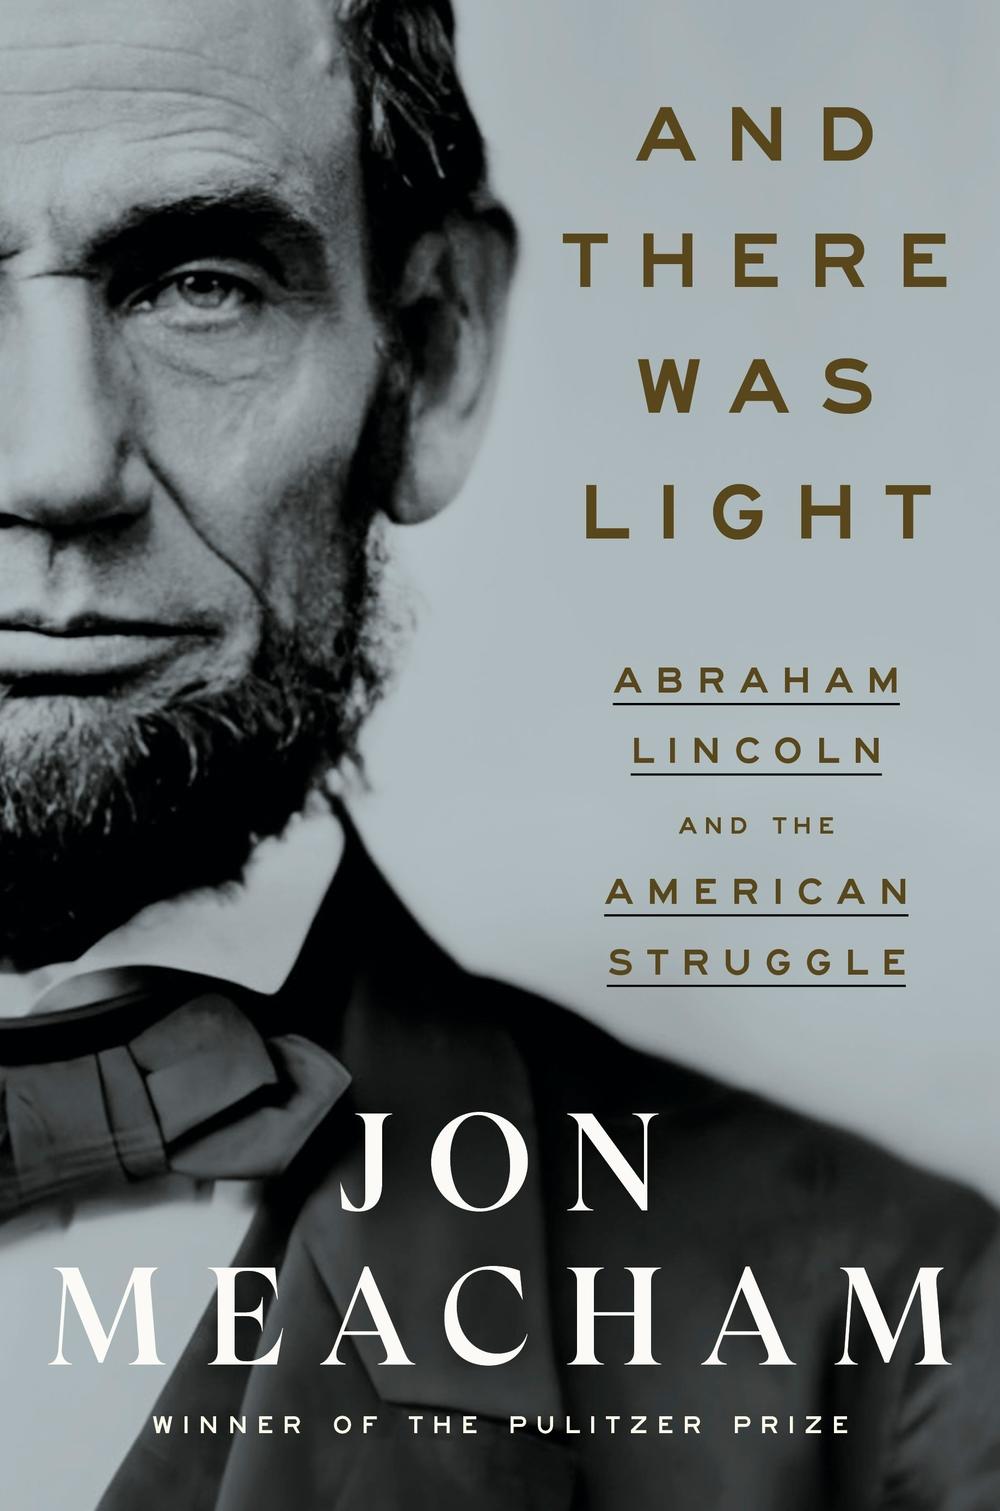 Meacham, who won the Pulitzer Prize for his biography of Andrew Jackson, has turned his attention to Lincoln in a new book.